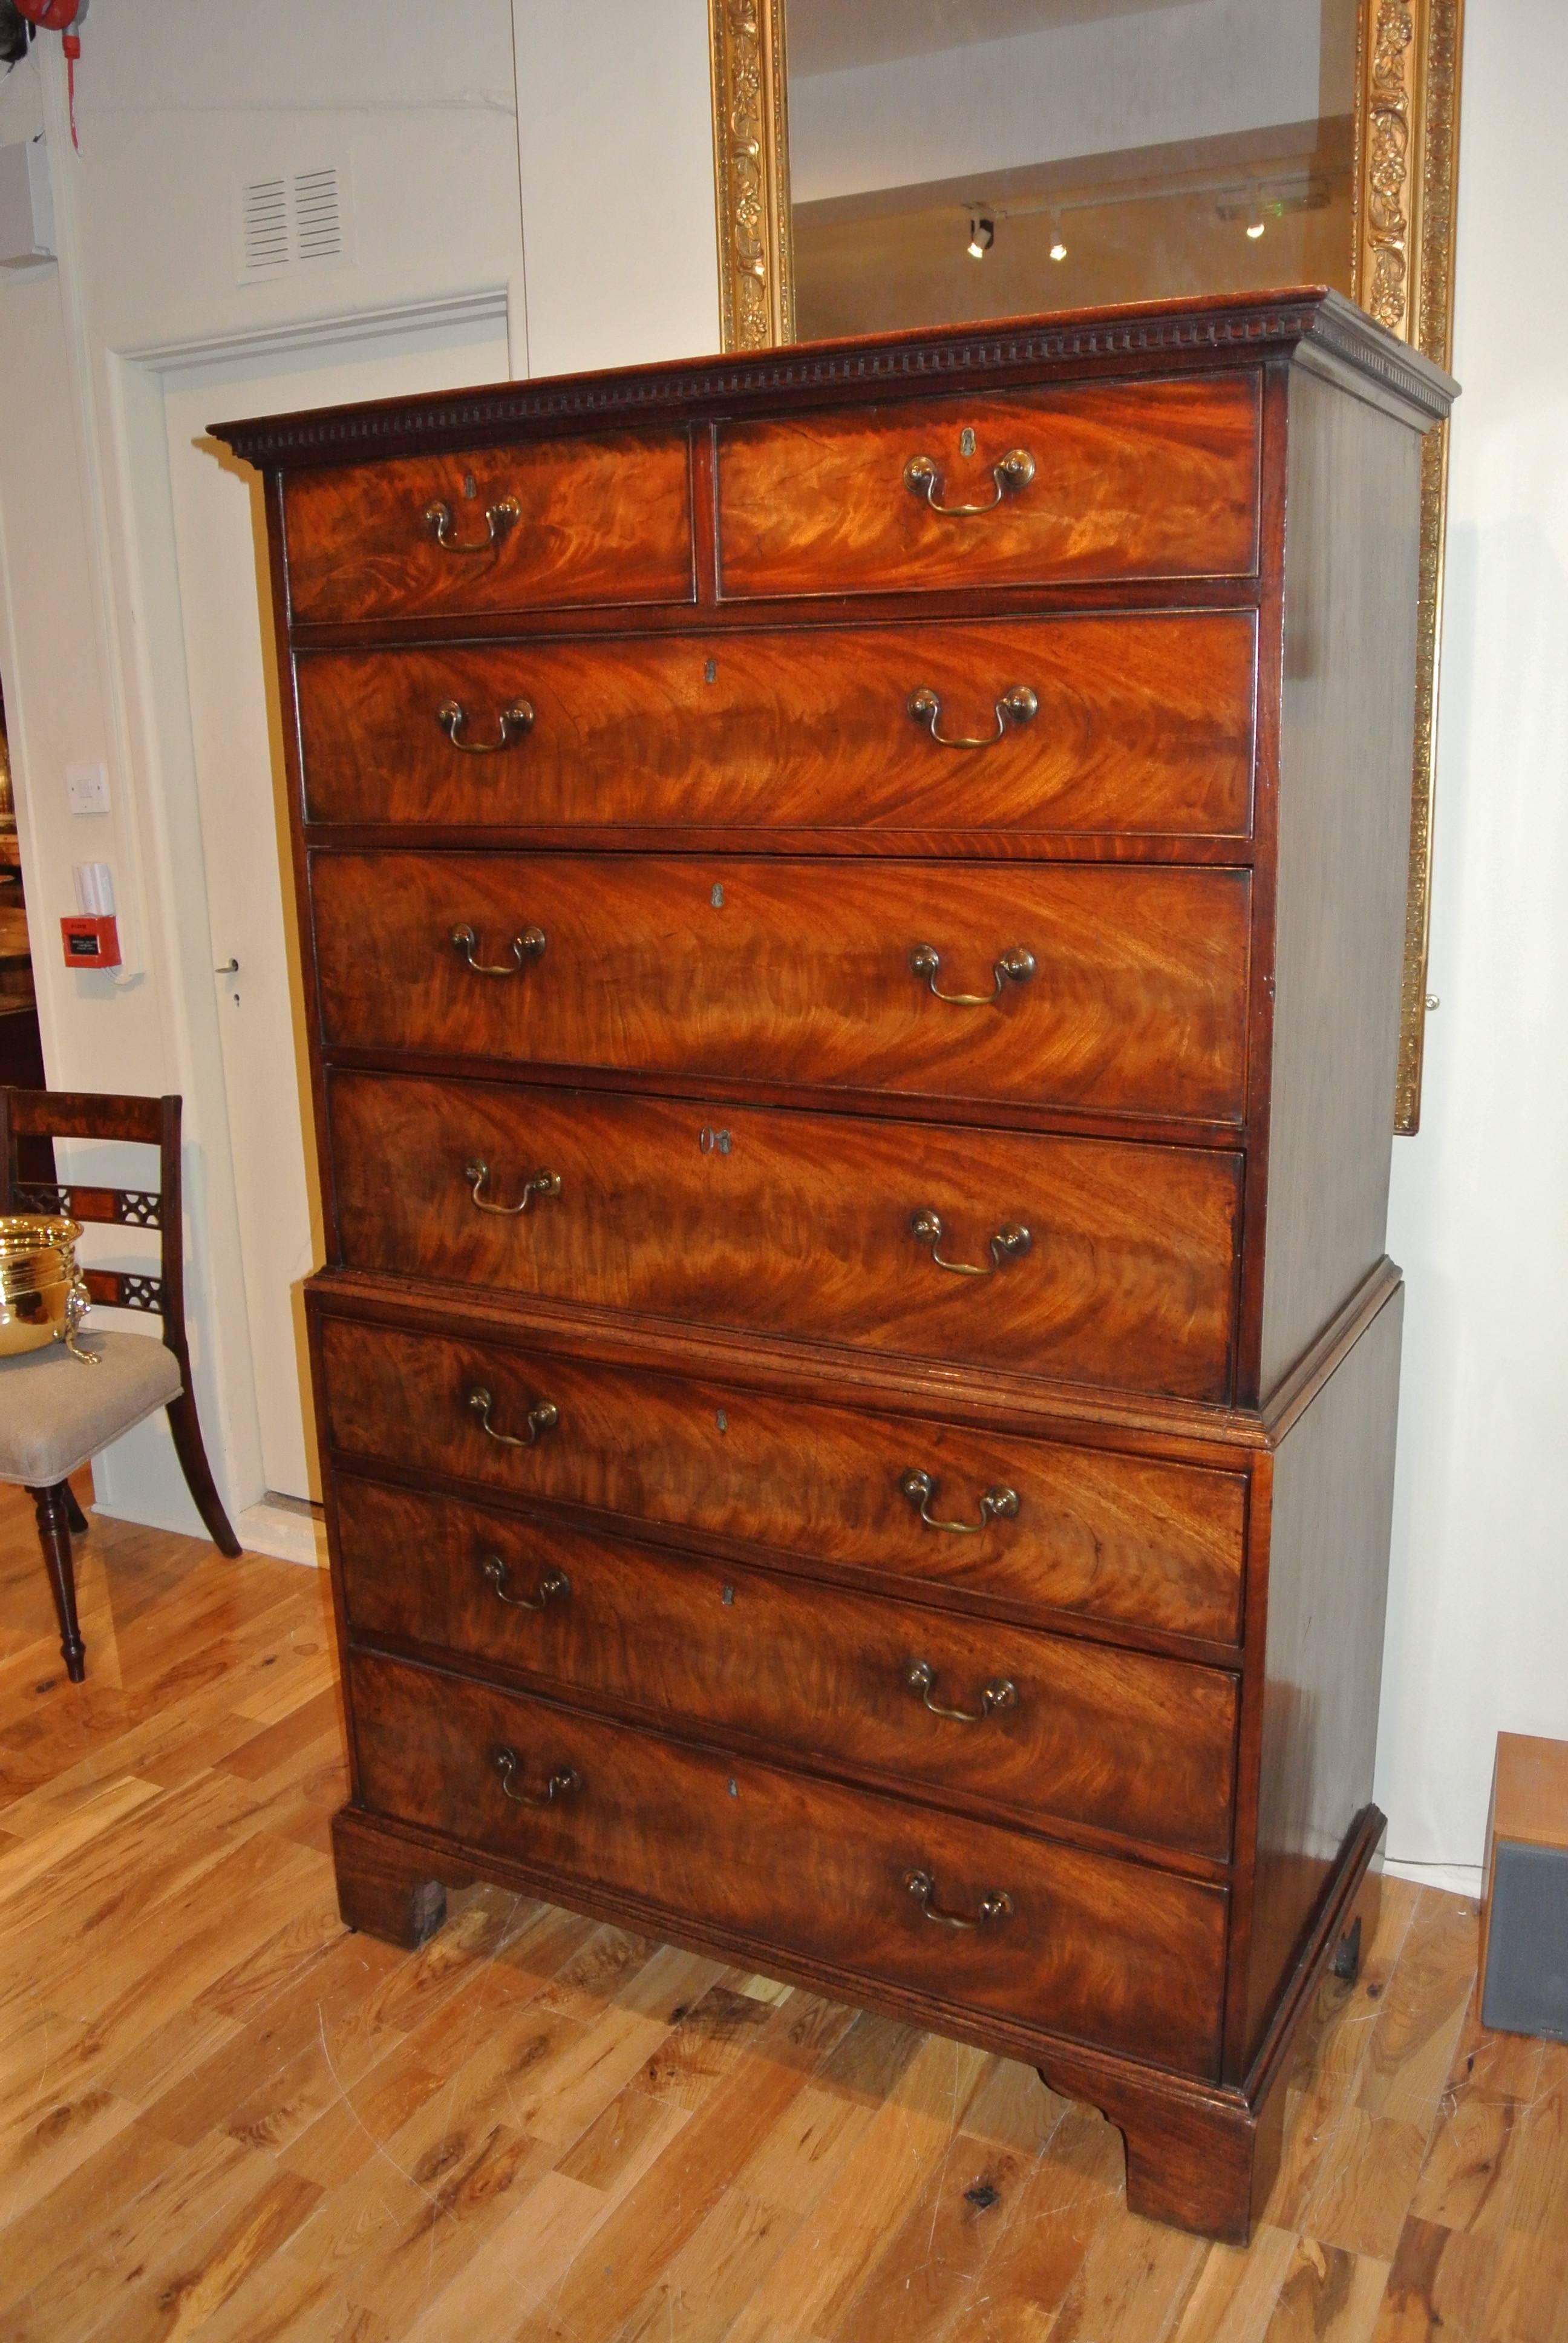 Flame mahogany tallboy of good proportions and colour with original brass escutcheons and swan neck handles, standing on bracket feet, all features original to the piece. Attributed to thomas chippendale the younger.